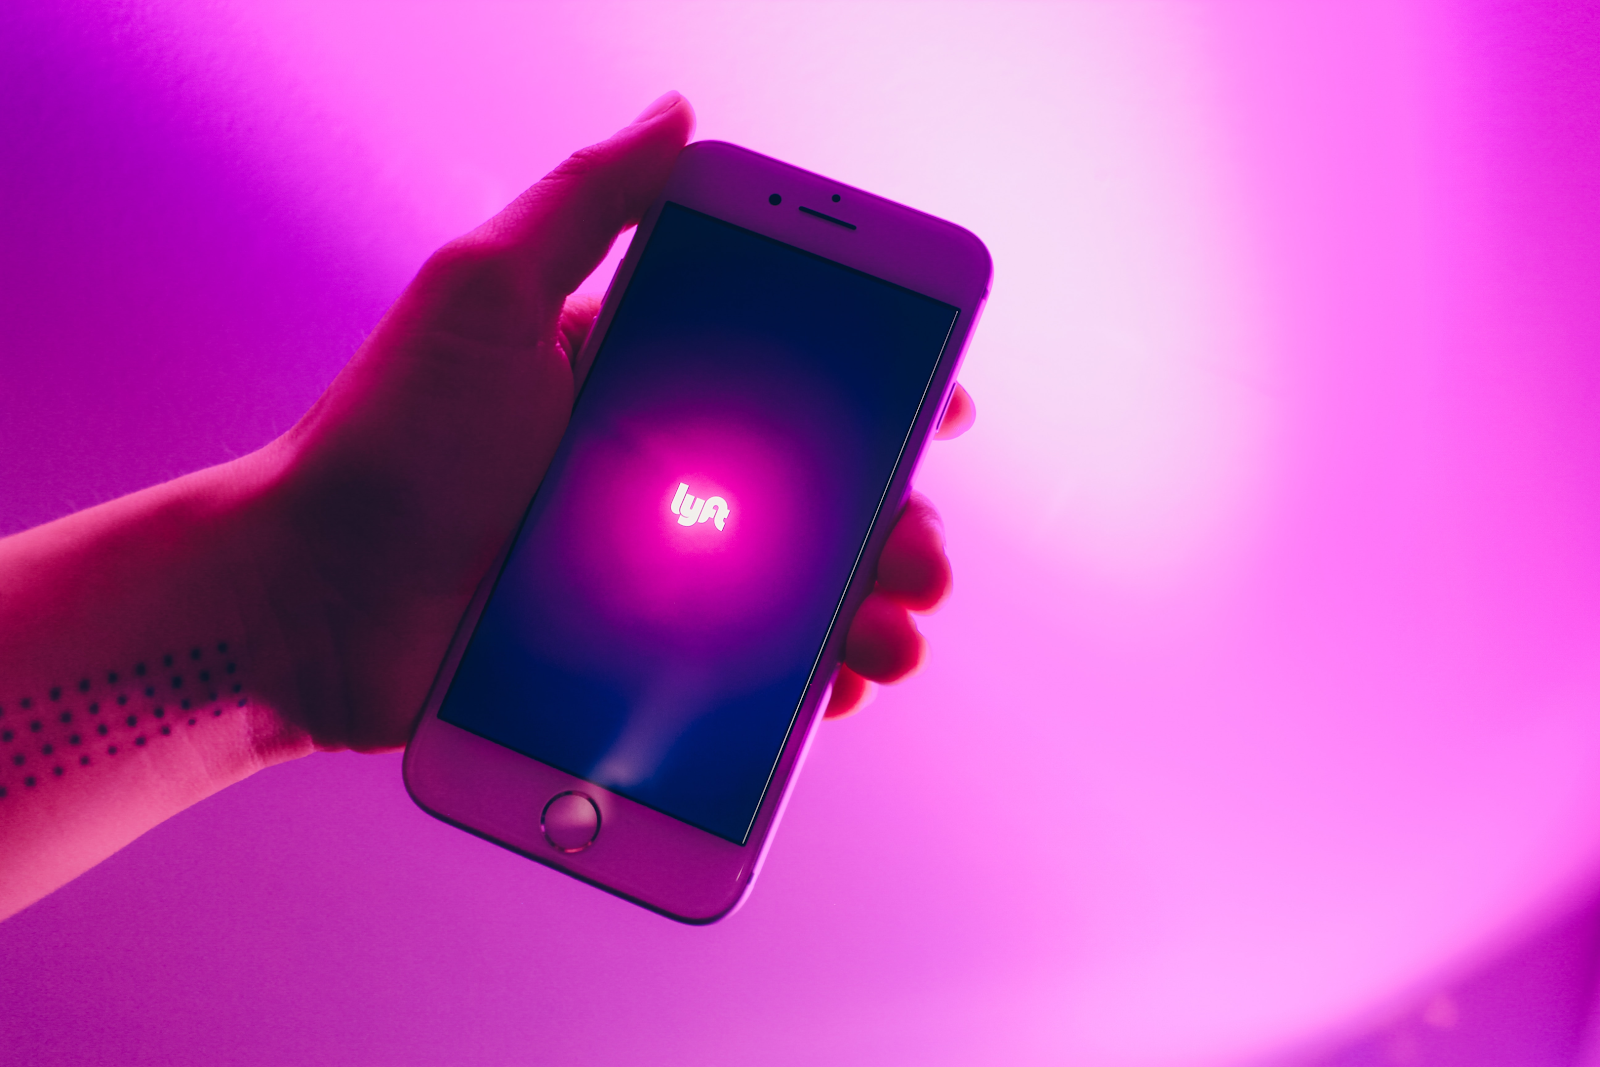 lyft app opening on an iphone rideshare services theme